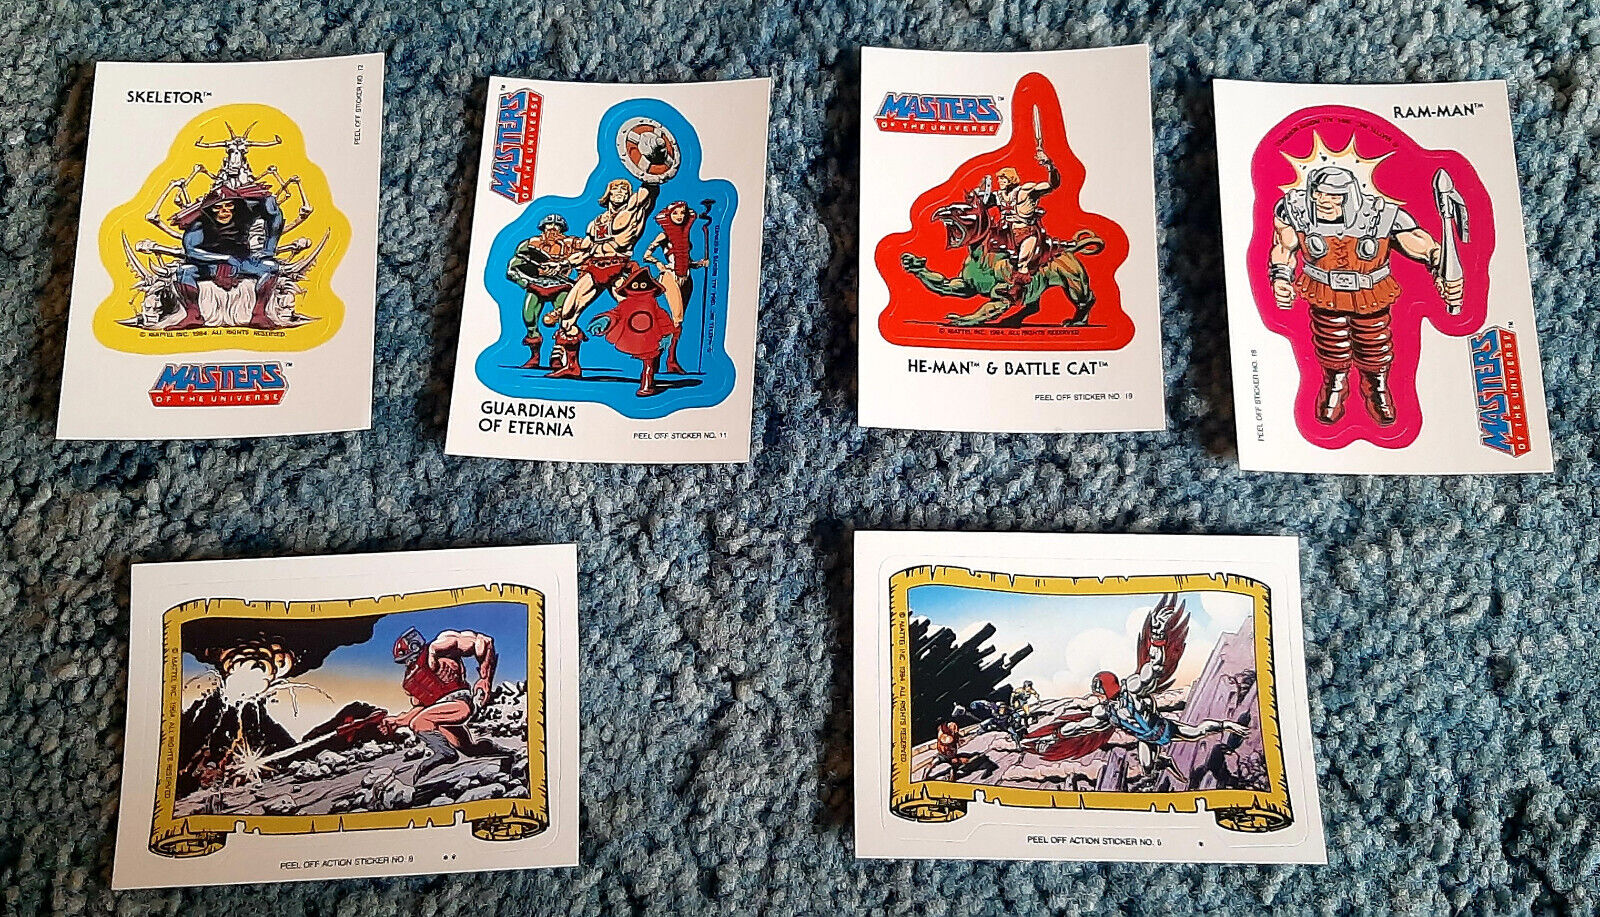 LOT of (6) 1984 TOPPS MASTERS OF THE UNIVERSE STICKER CARDS ~ HE-MAN & SKELETOR